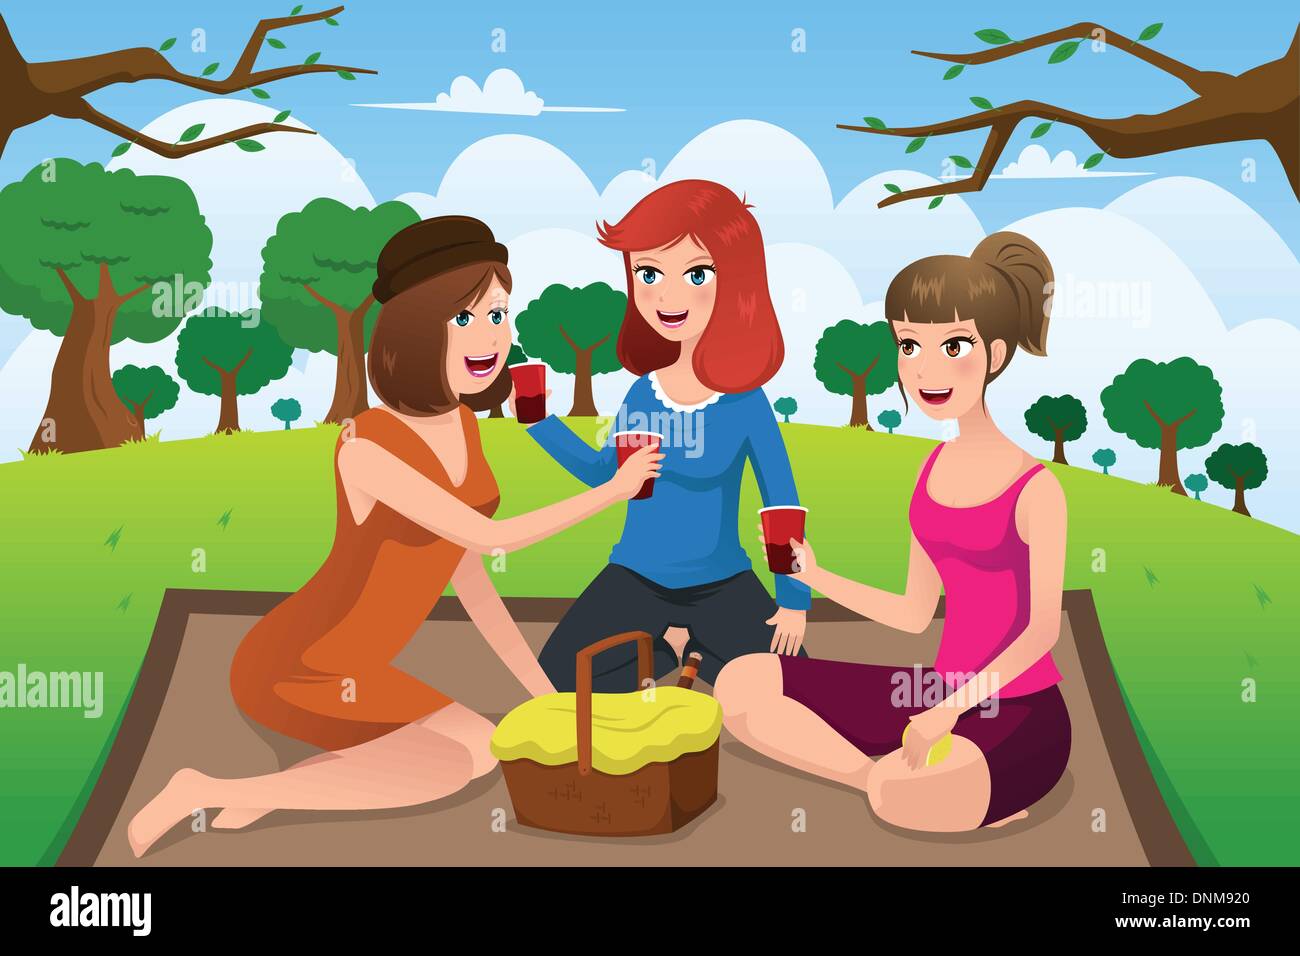 A vector illustration of group of young women having picnic in a park together Stock Vector